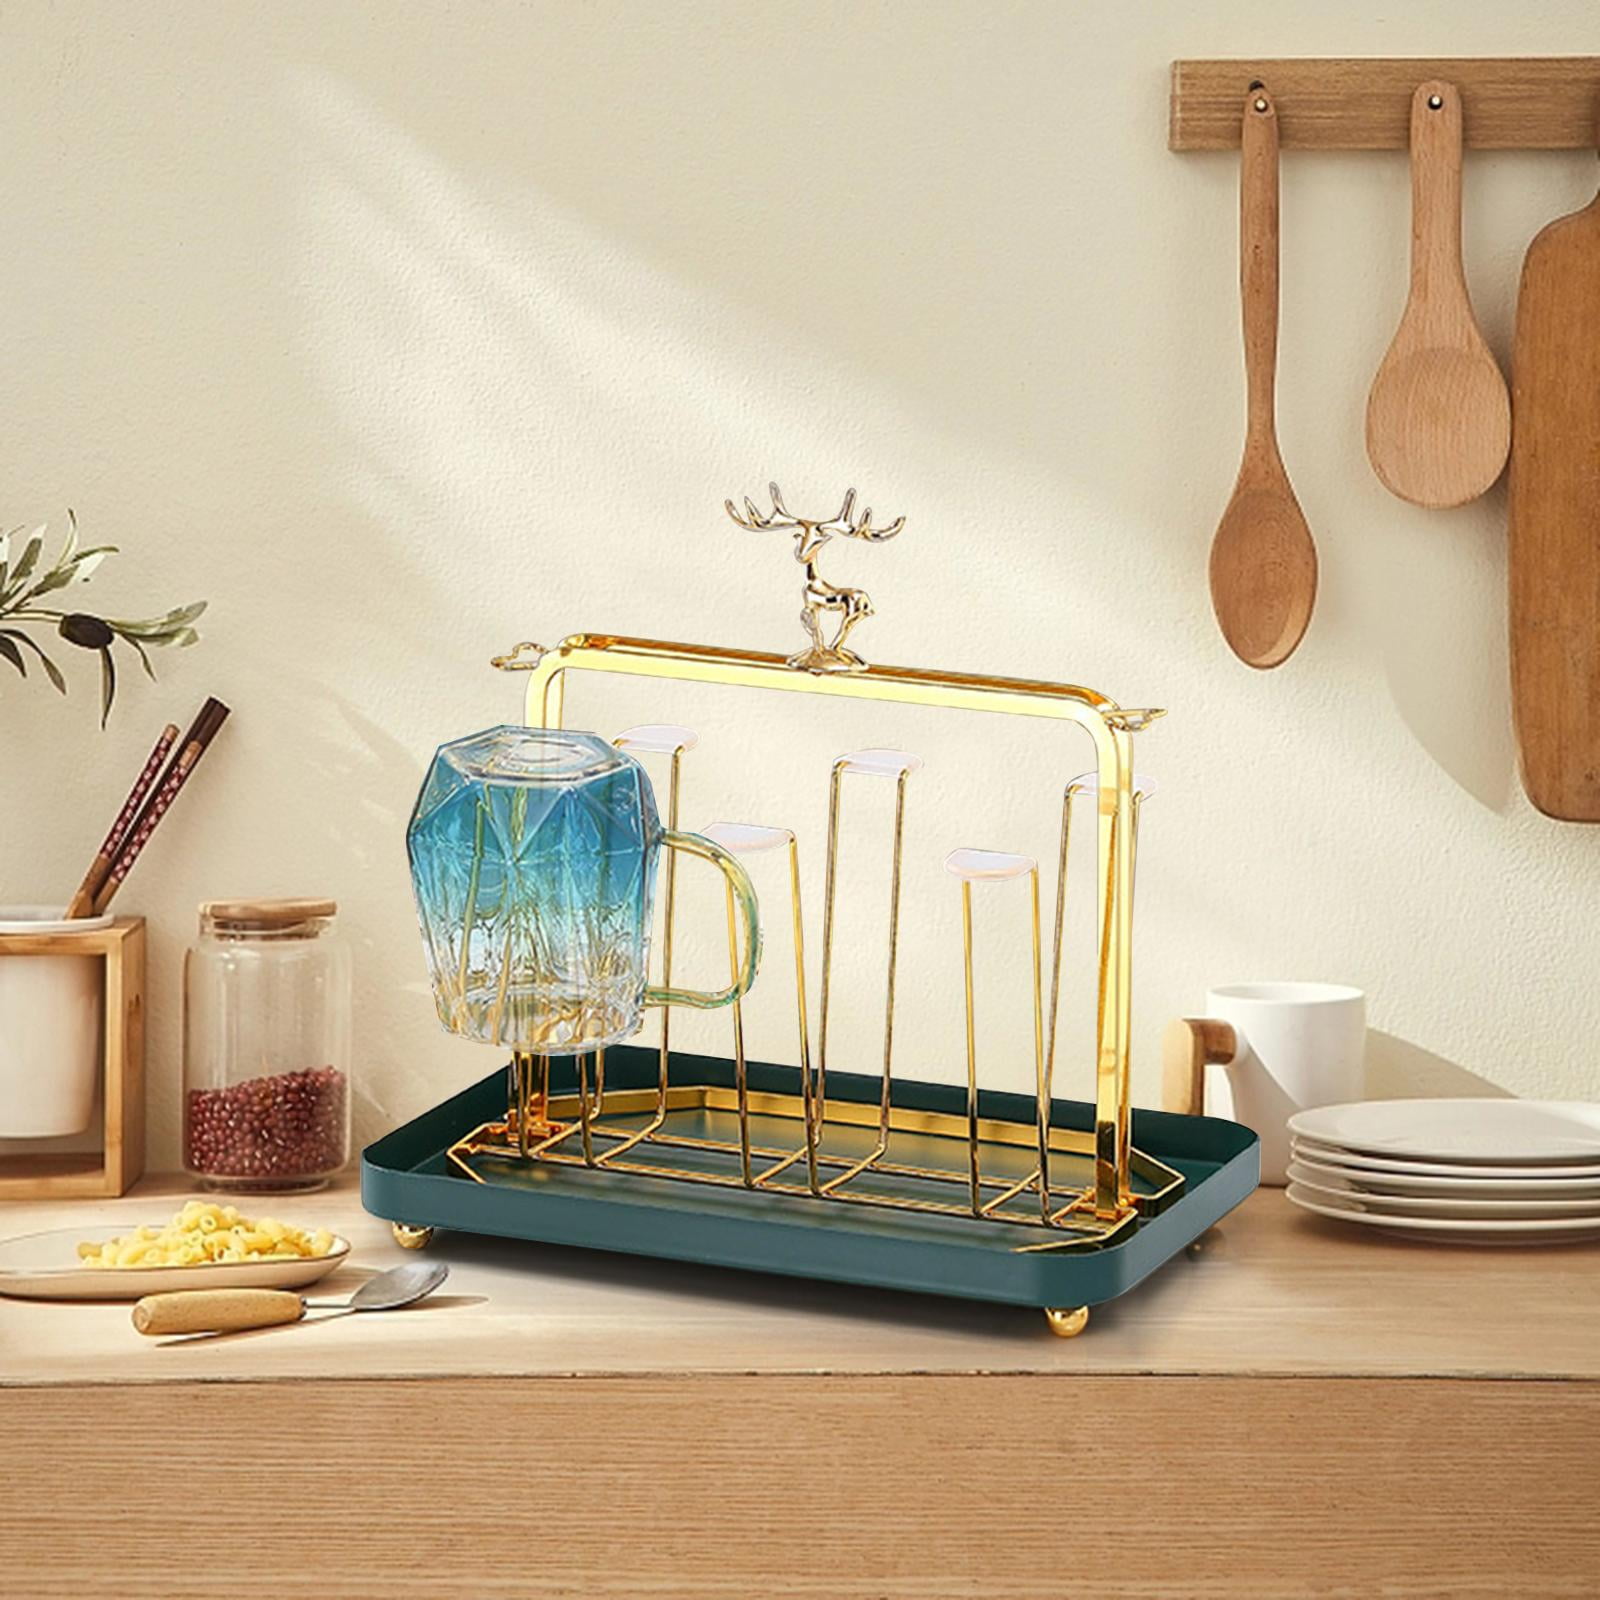 Cup Drying Rack for Kitchen Counter – AMRA GOODS